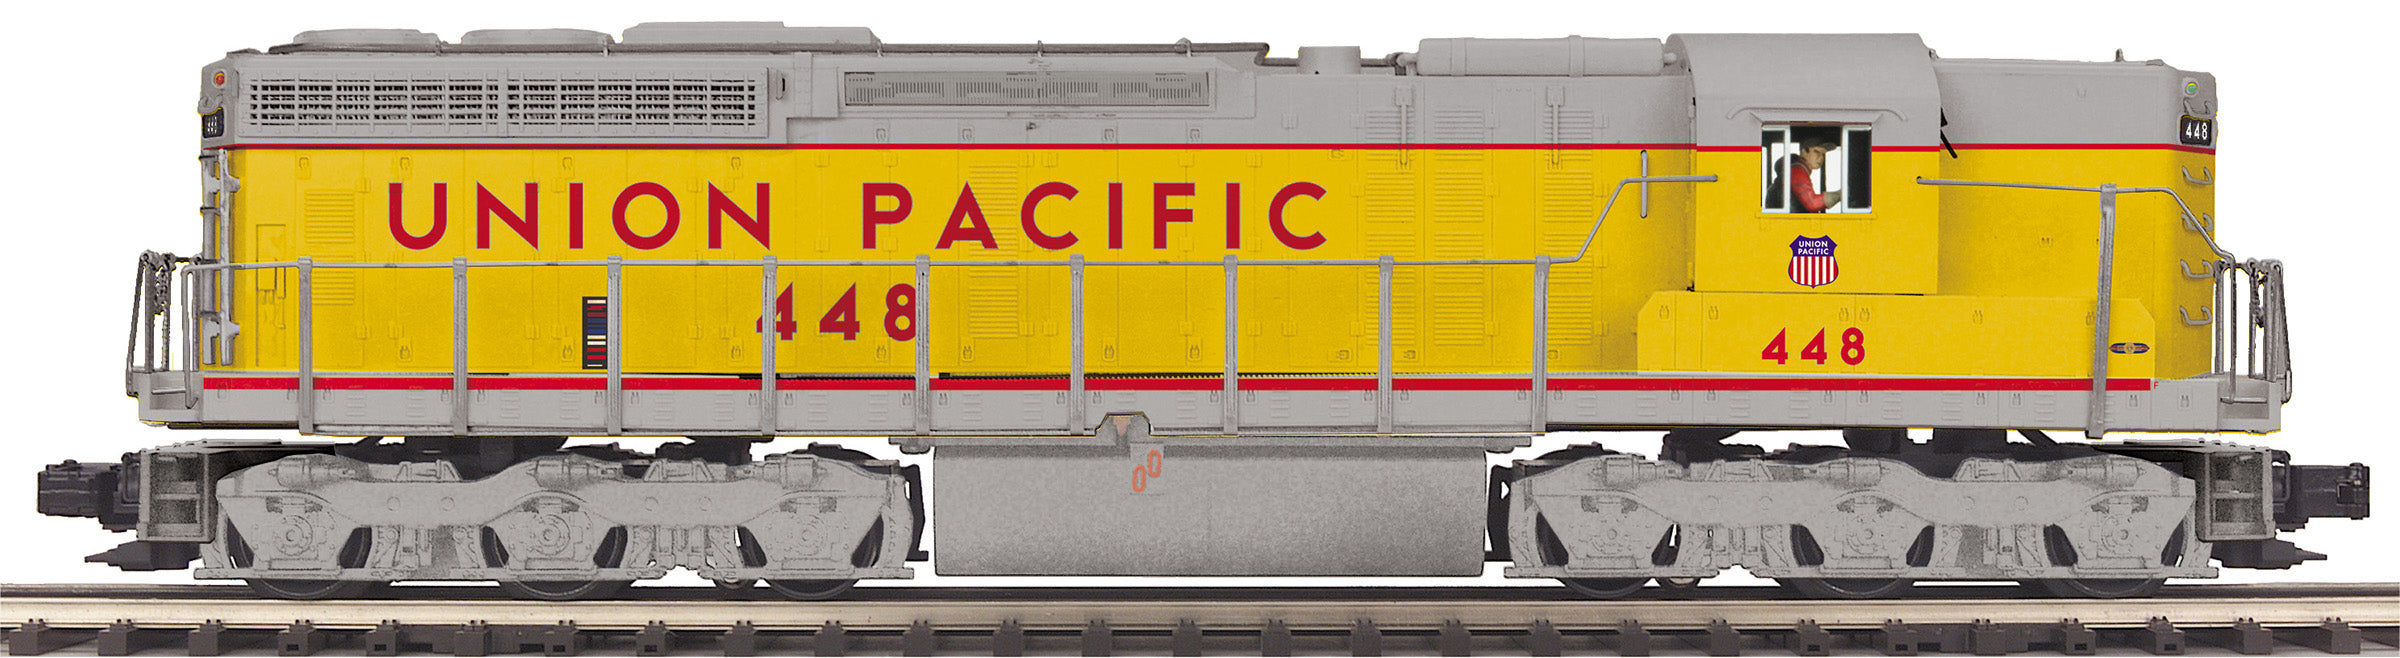 MTH 20-21724-1 - SD24 Diesel Engine "Union Pacific" #448 w/ PS3